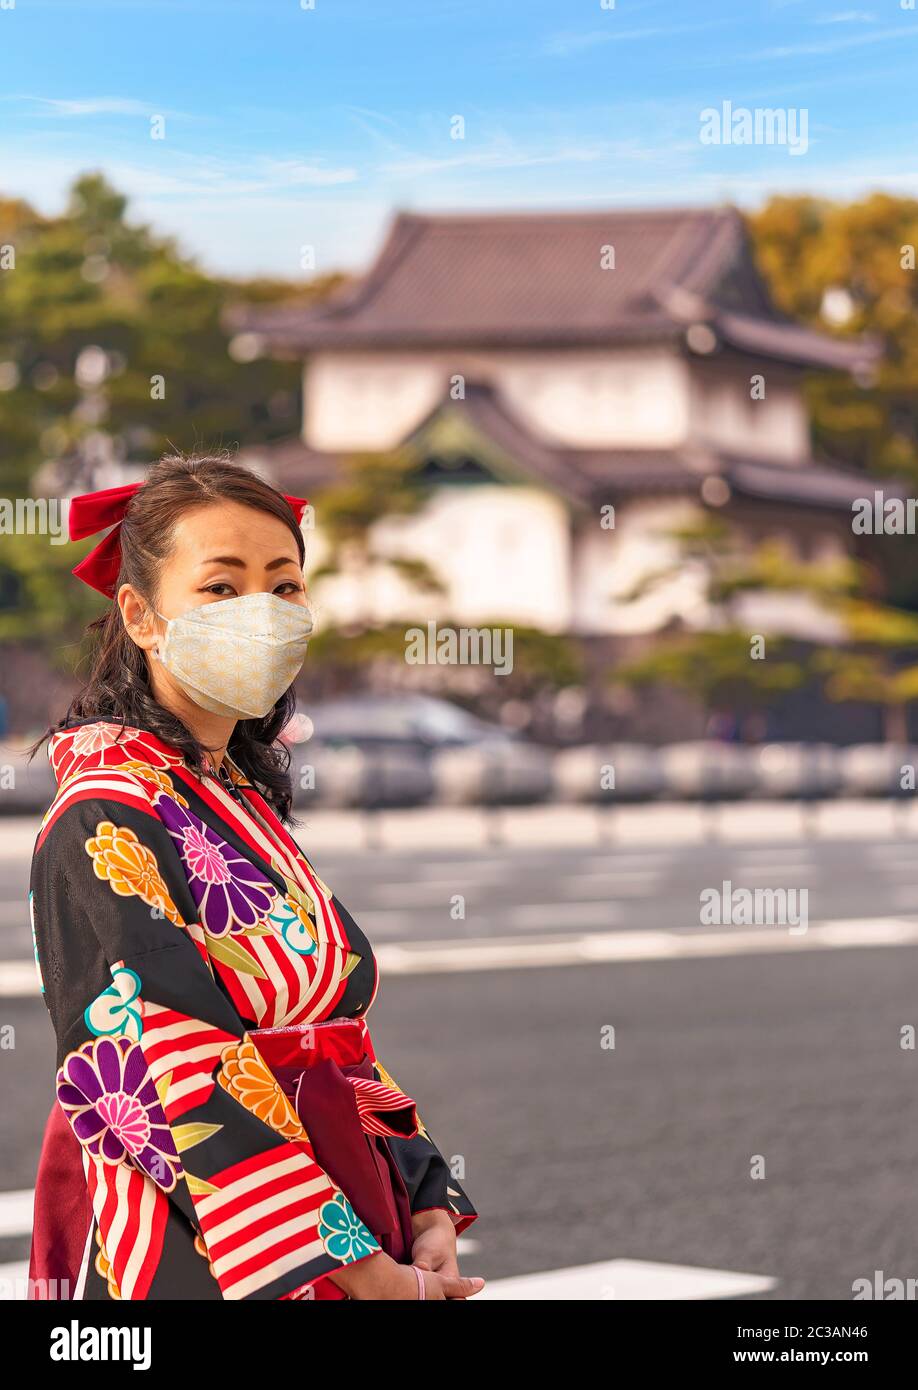 Japanese woman in hakama kimono in front of the dungeon Edojō sakurada tatsumiyagura with moats lined with pine trees outside of the Tokyo Imperial Pa Stock Photo